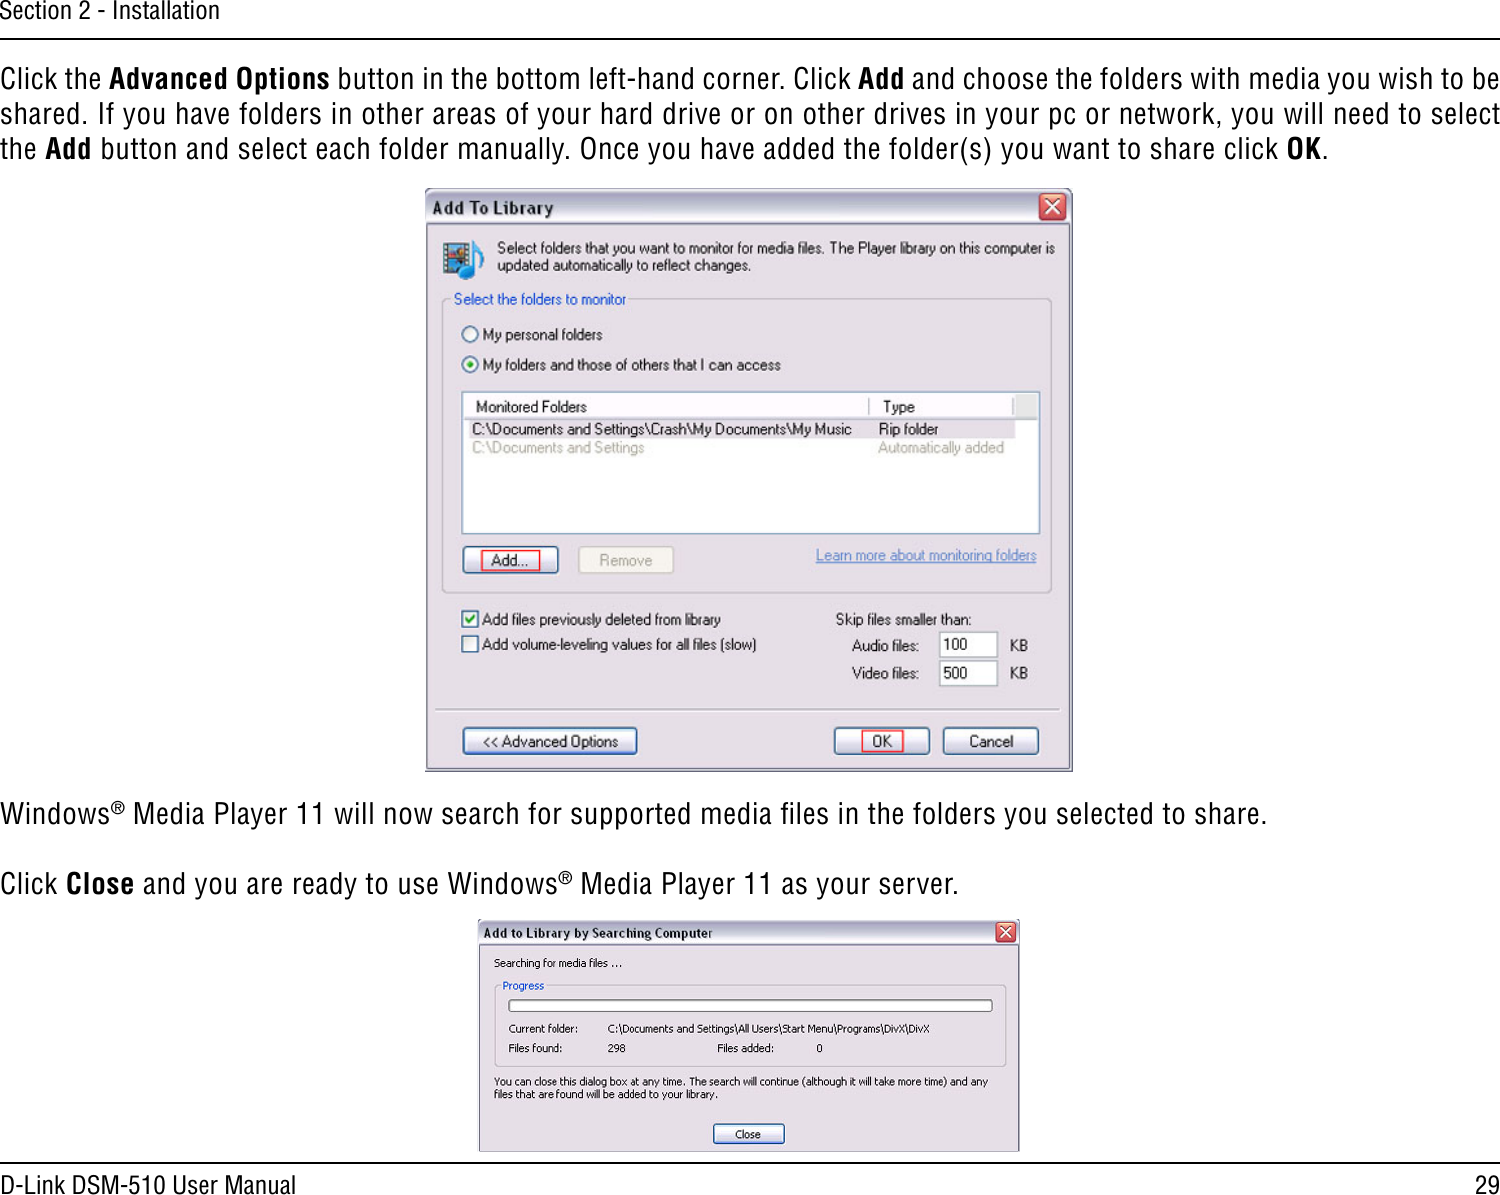 29D-Link DSM-510 User ManualSection 2 - InstallationClick the Advanced Options button in the bottom left-hand corner. Click Add and choose the folders with media you wish to be shared. If you have folders in other areas of your hard drive or on other drives in your pc or network, you will need to select the Add button and select each folder manually. Once you have added the folder(s) you want to share click OK.Windows® Media Player 11 will now search for supported media ﬁles in the folders you selected to share. Click Close and you are ready to use Windows® Media Player 11 as your server.